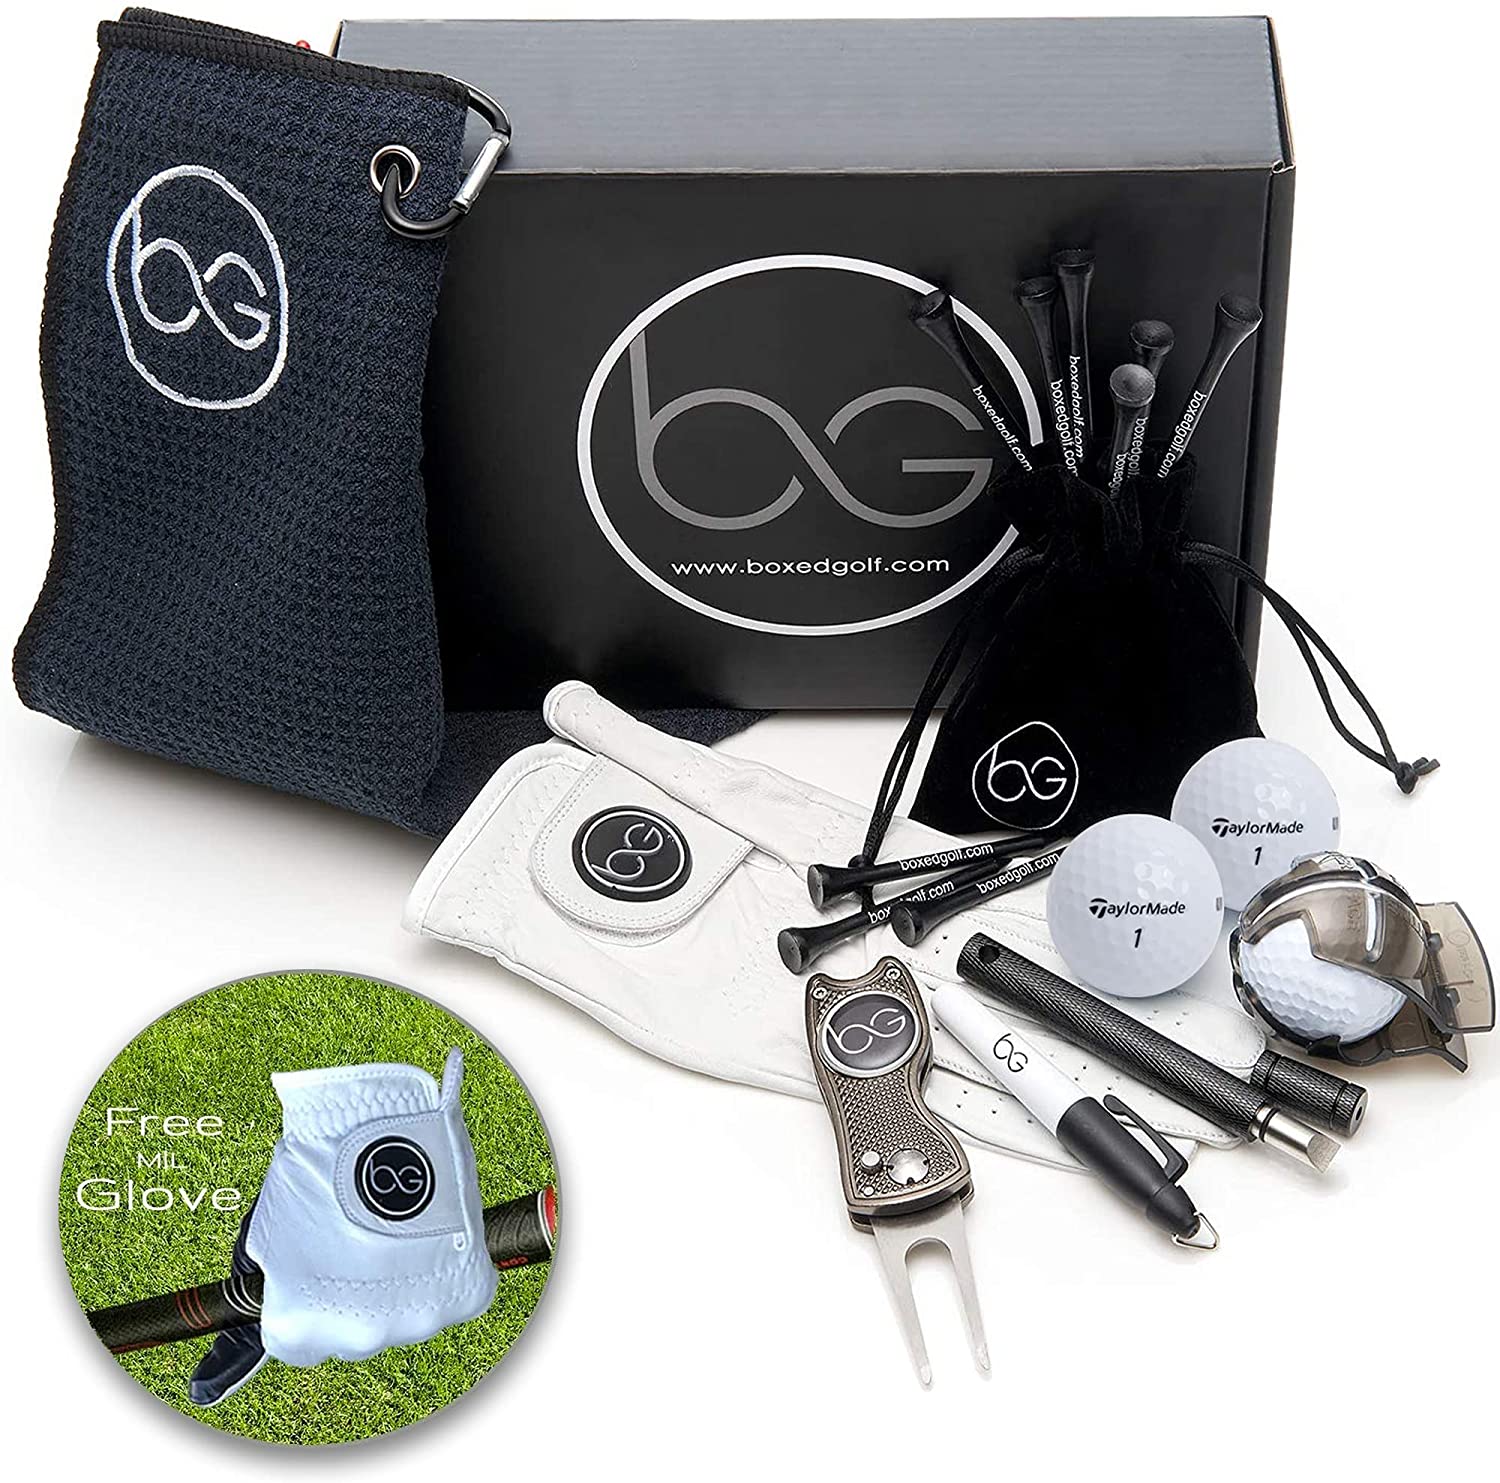 Signature Golf Gift Box - The Perfect Gift Set for Golfers